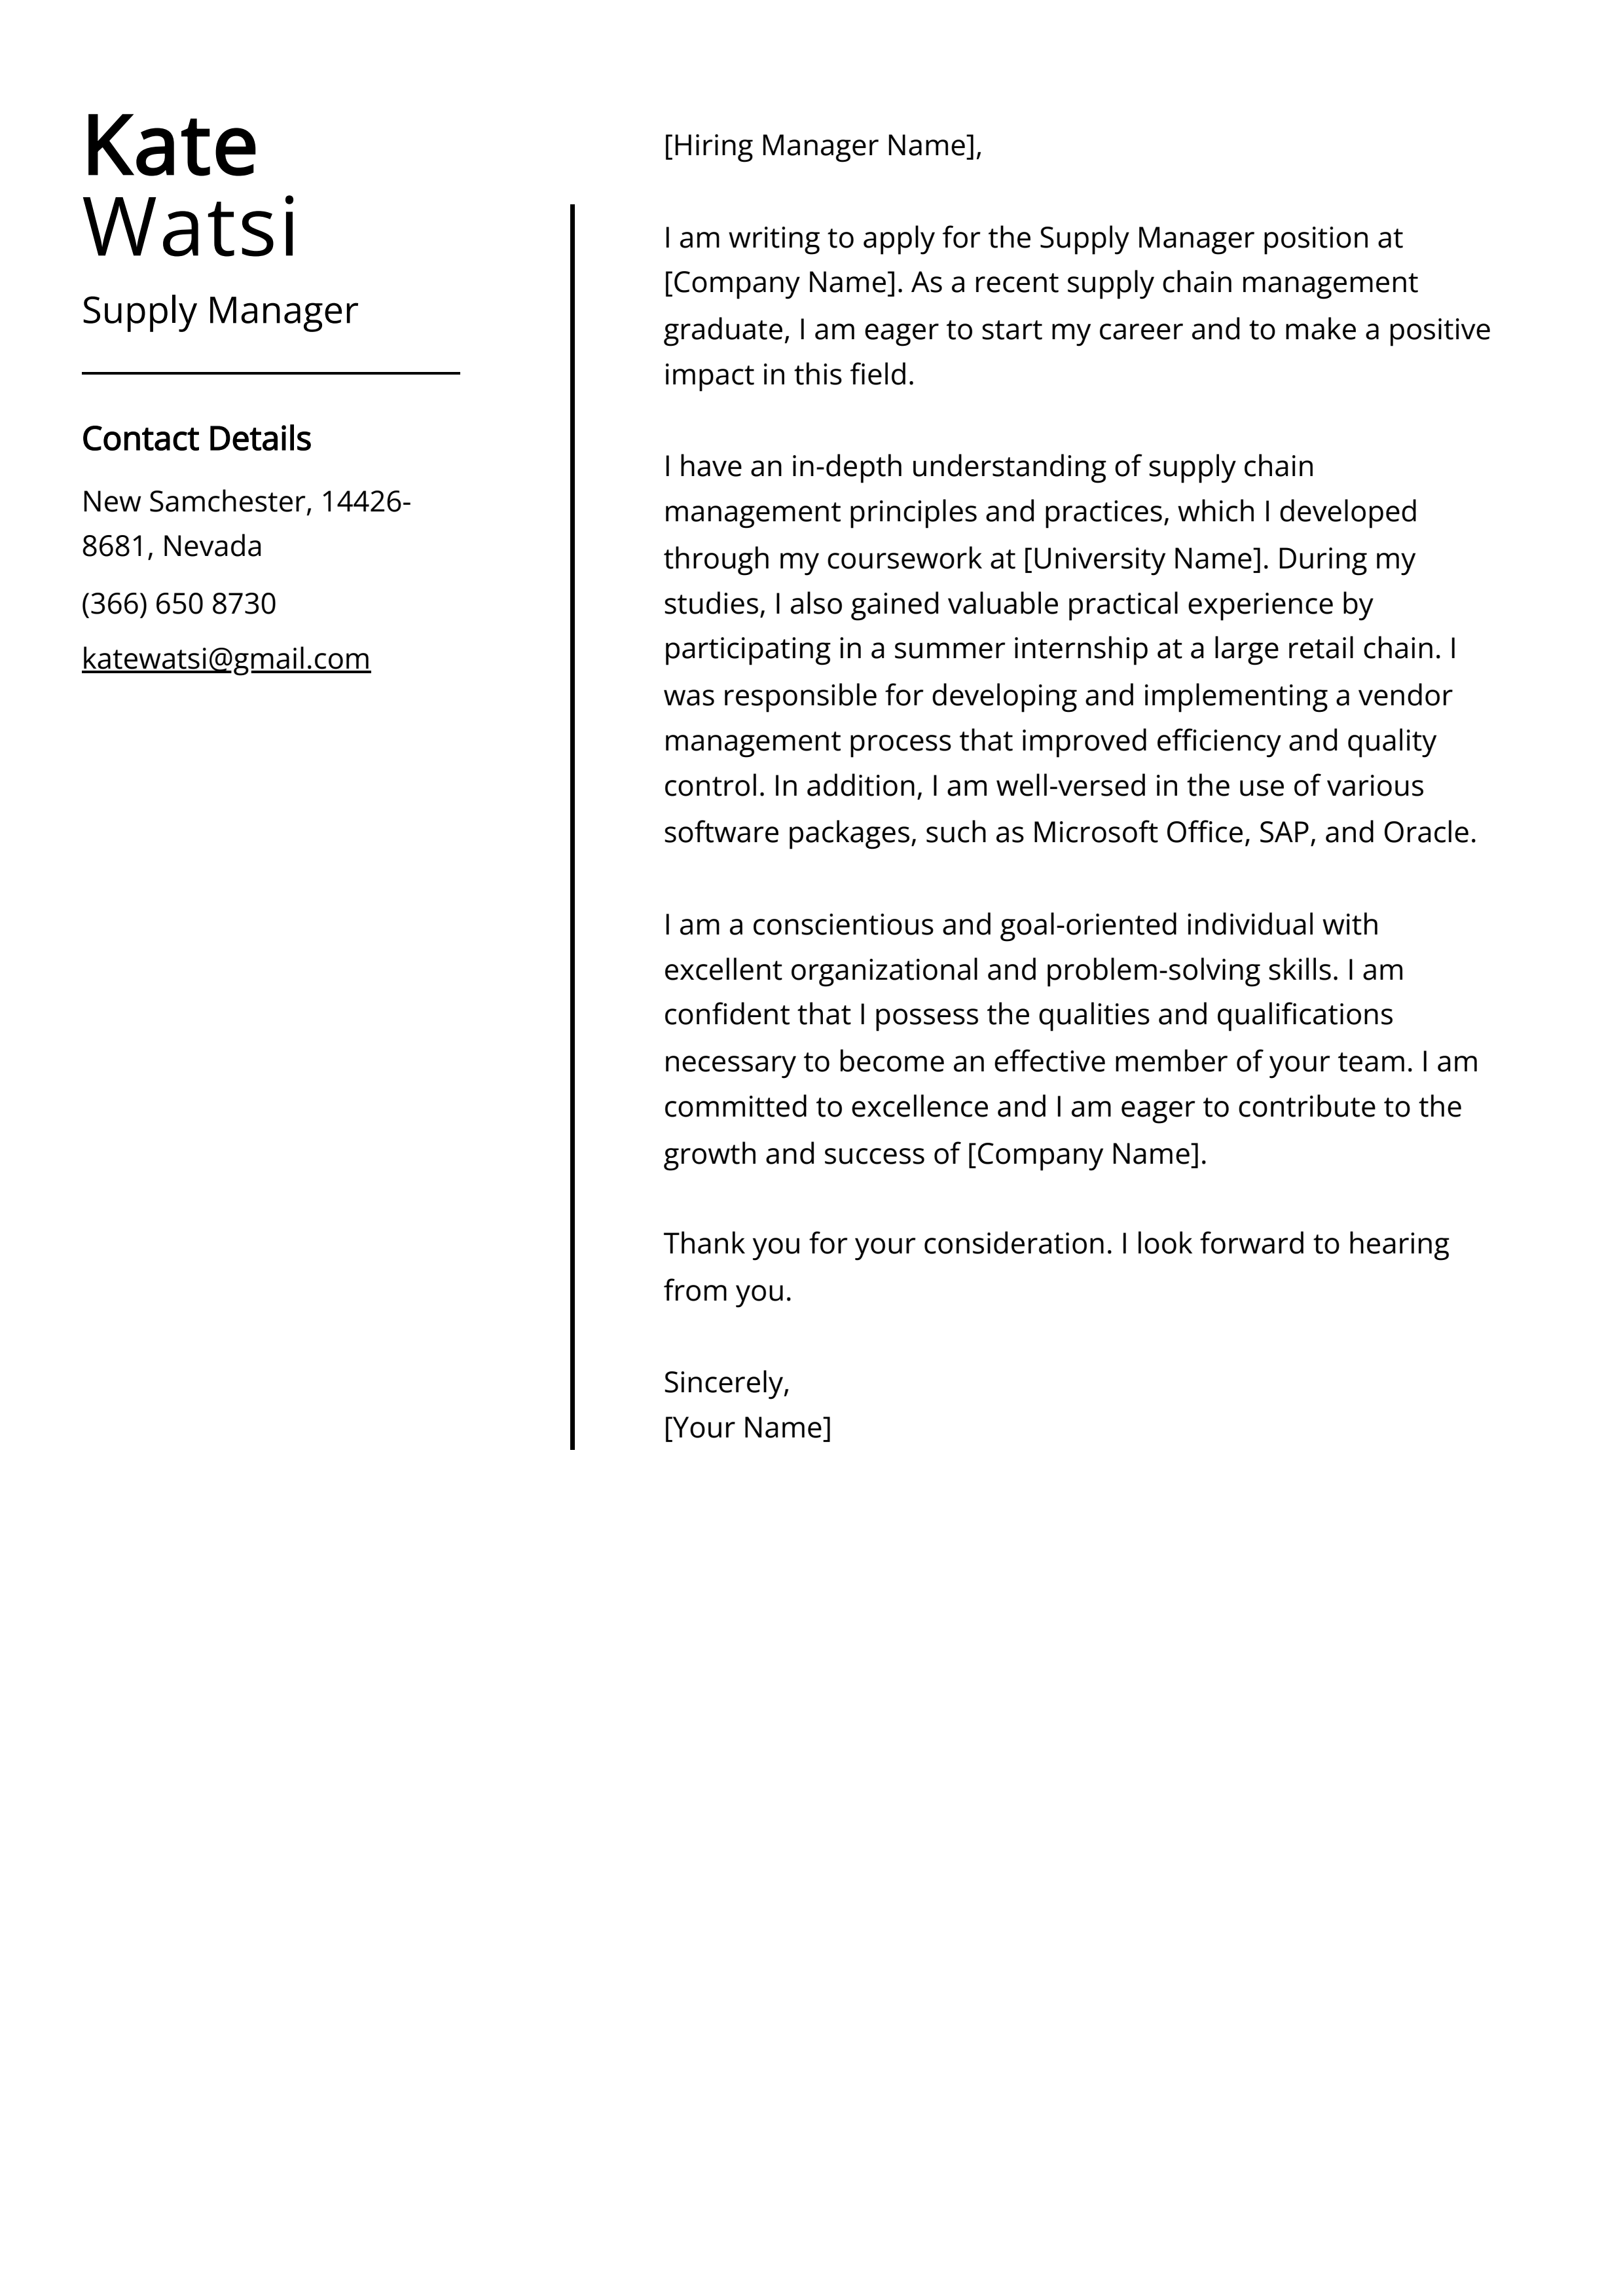 Supply Manager Cover Letter Example